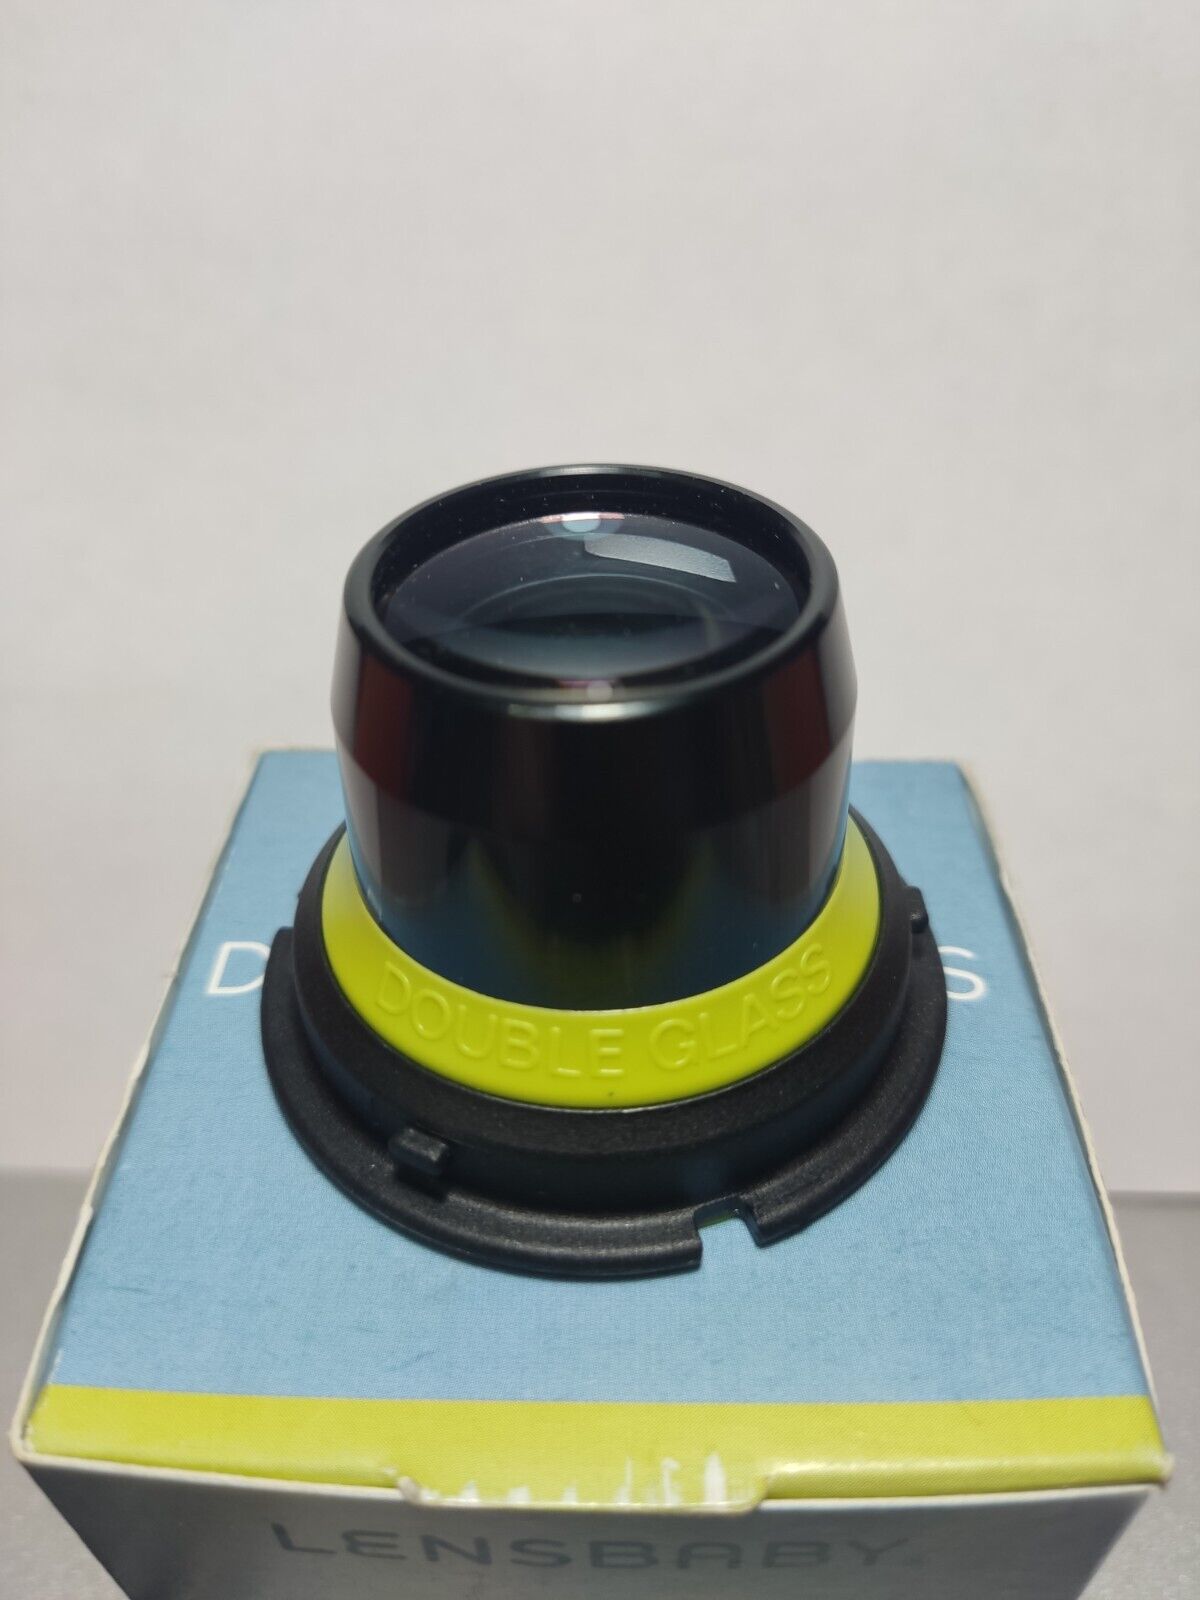 Lensbaby Double Glass Optic for Lensbaby Composer, Muse and Control Freak Lenses